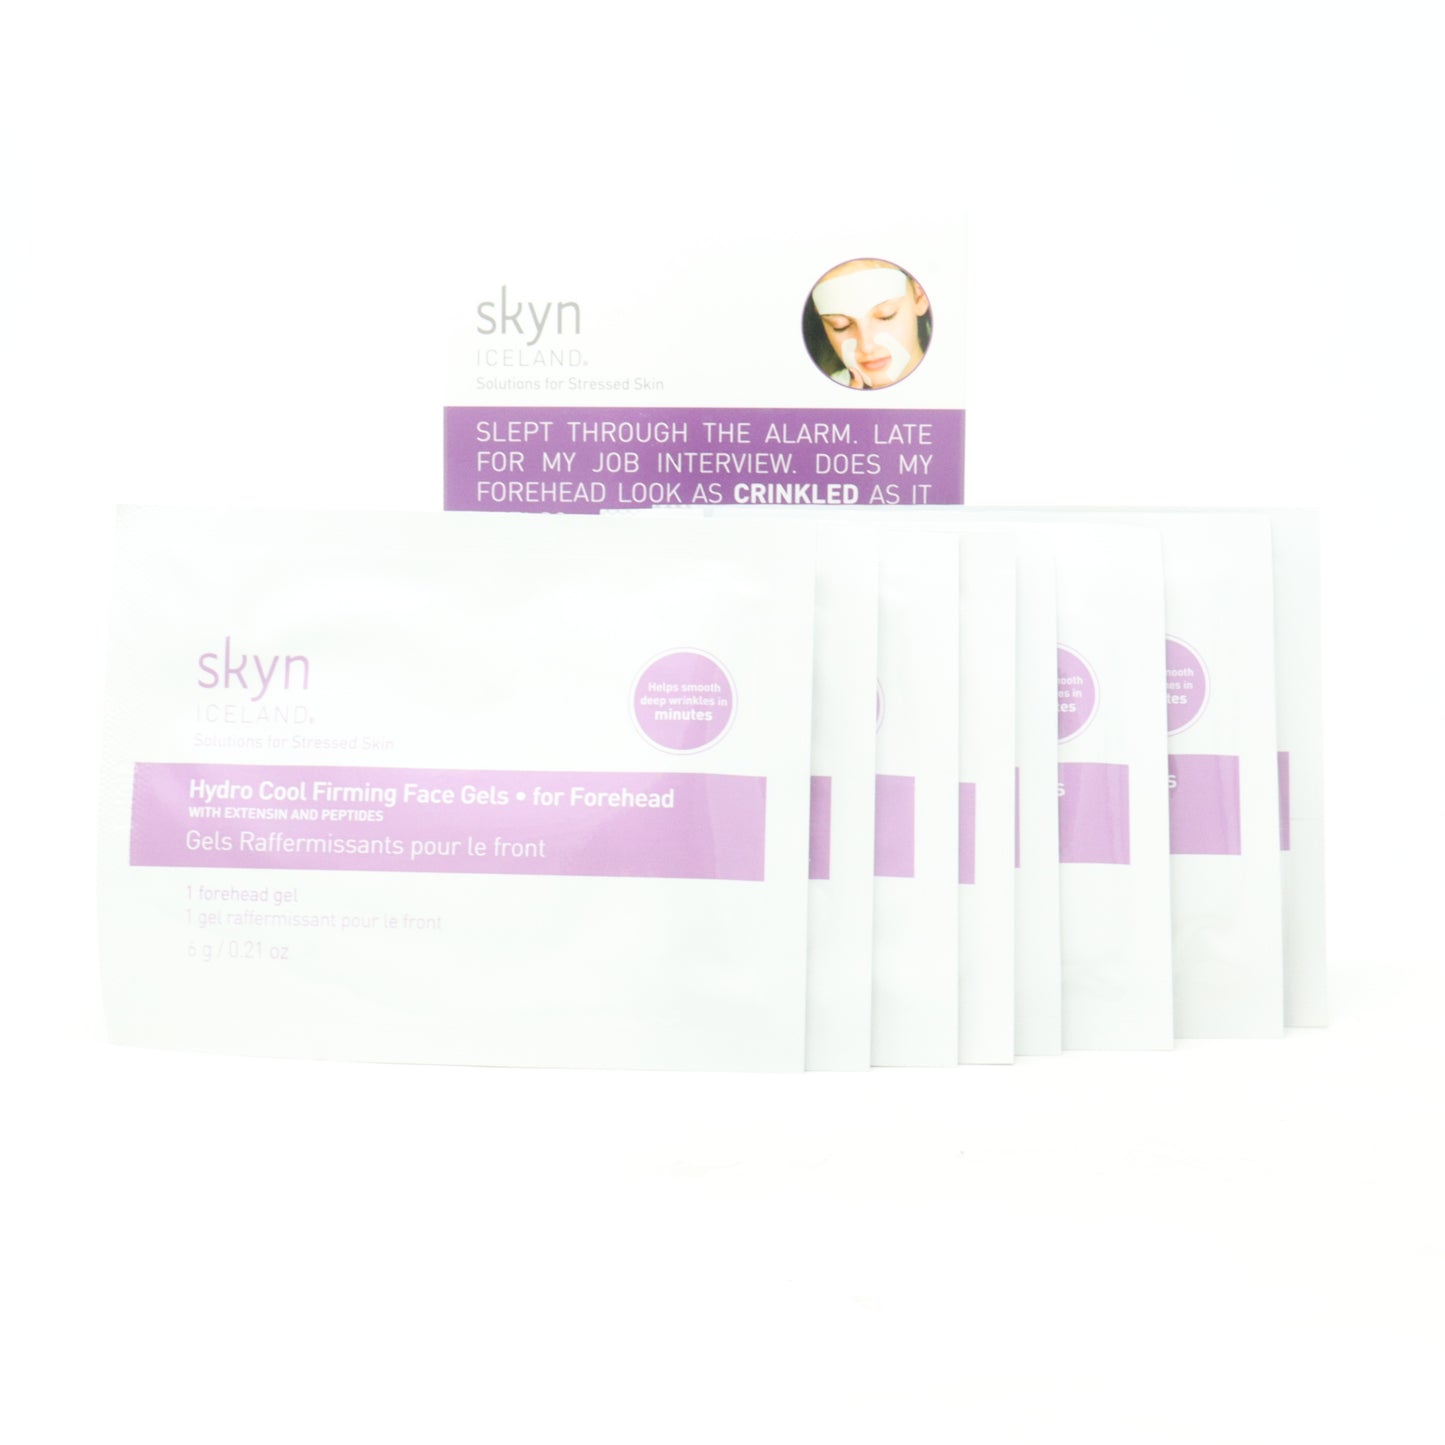 Hydro Cool Firming Face Gels 8 Gel Patches